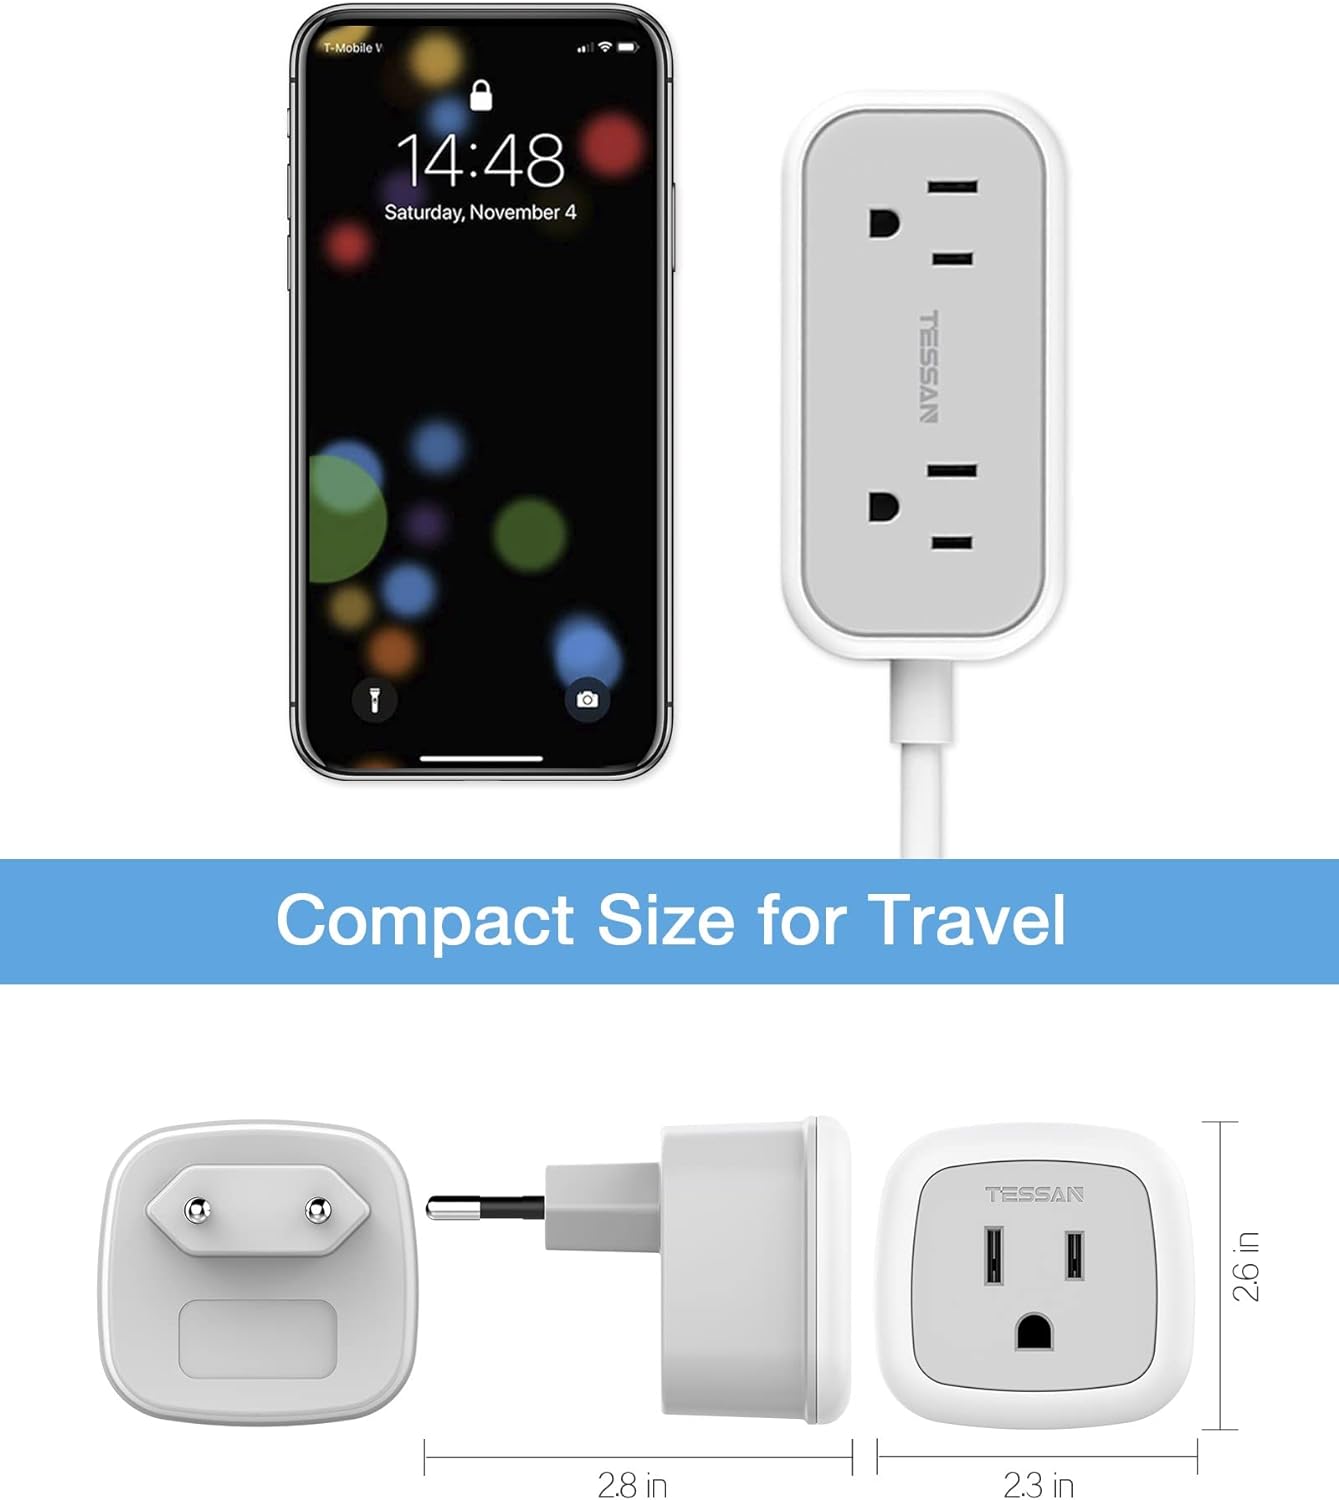 TESSAN European Travel Plug Adapter with Power Strip, EU UK Travel Extension Cord with 2 Outlet 3 USB